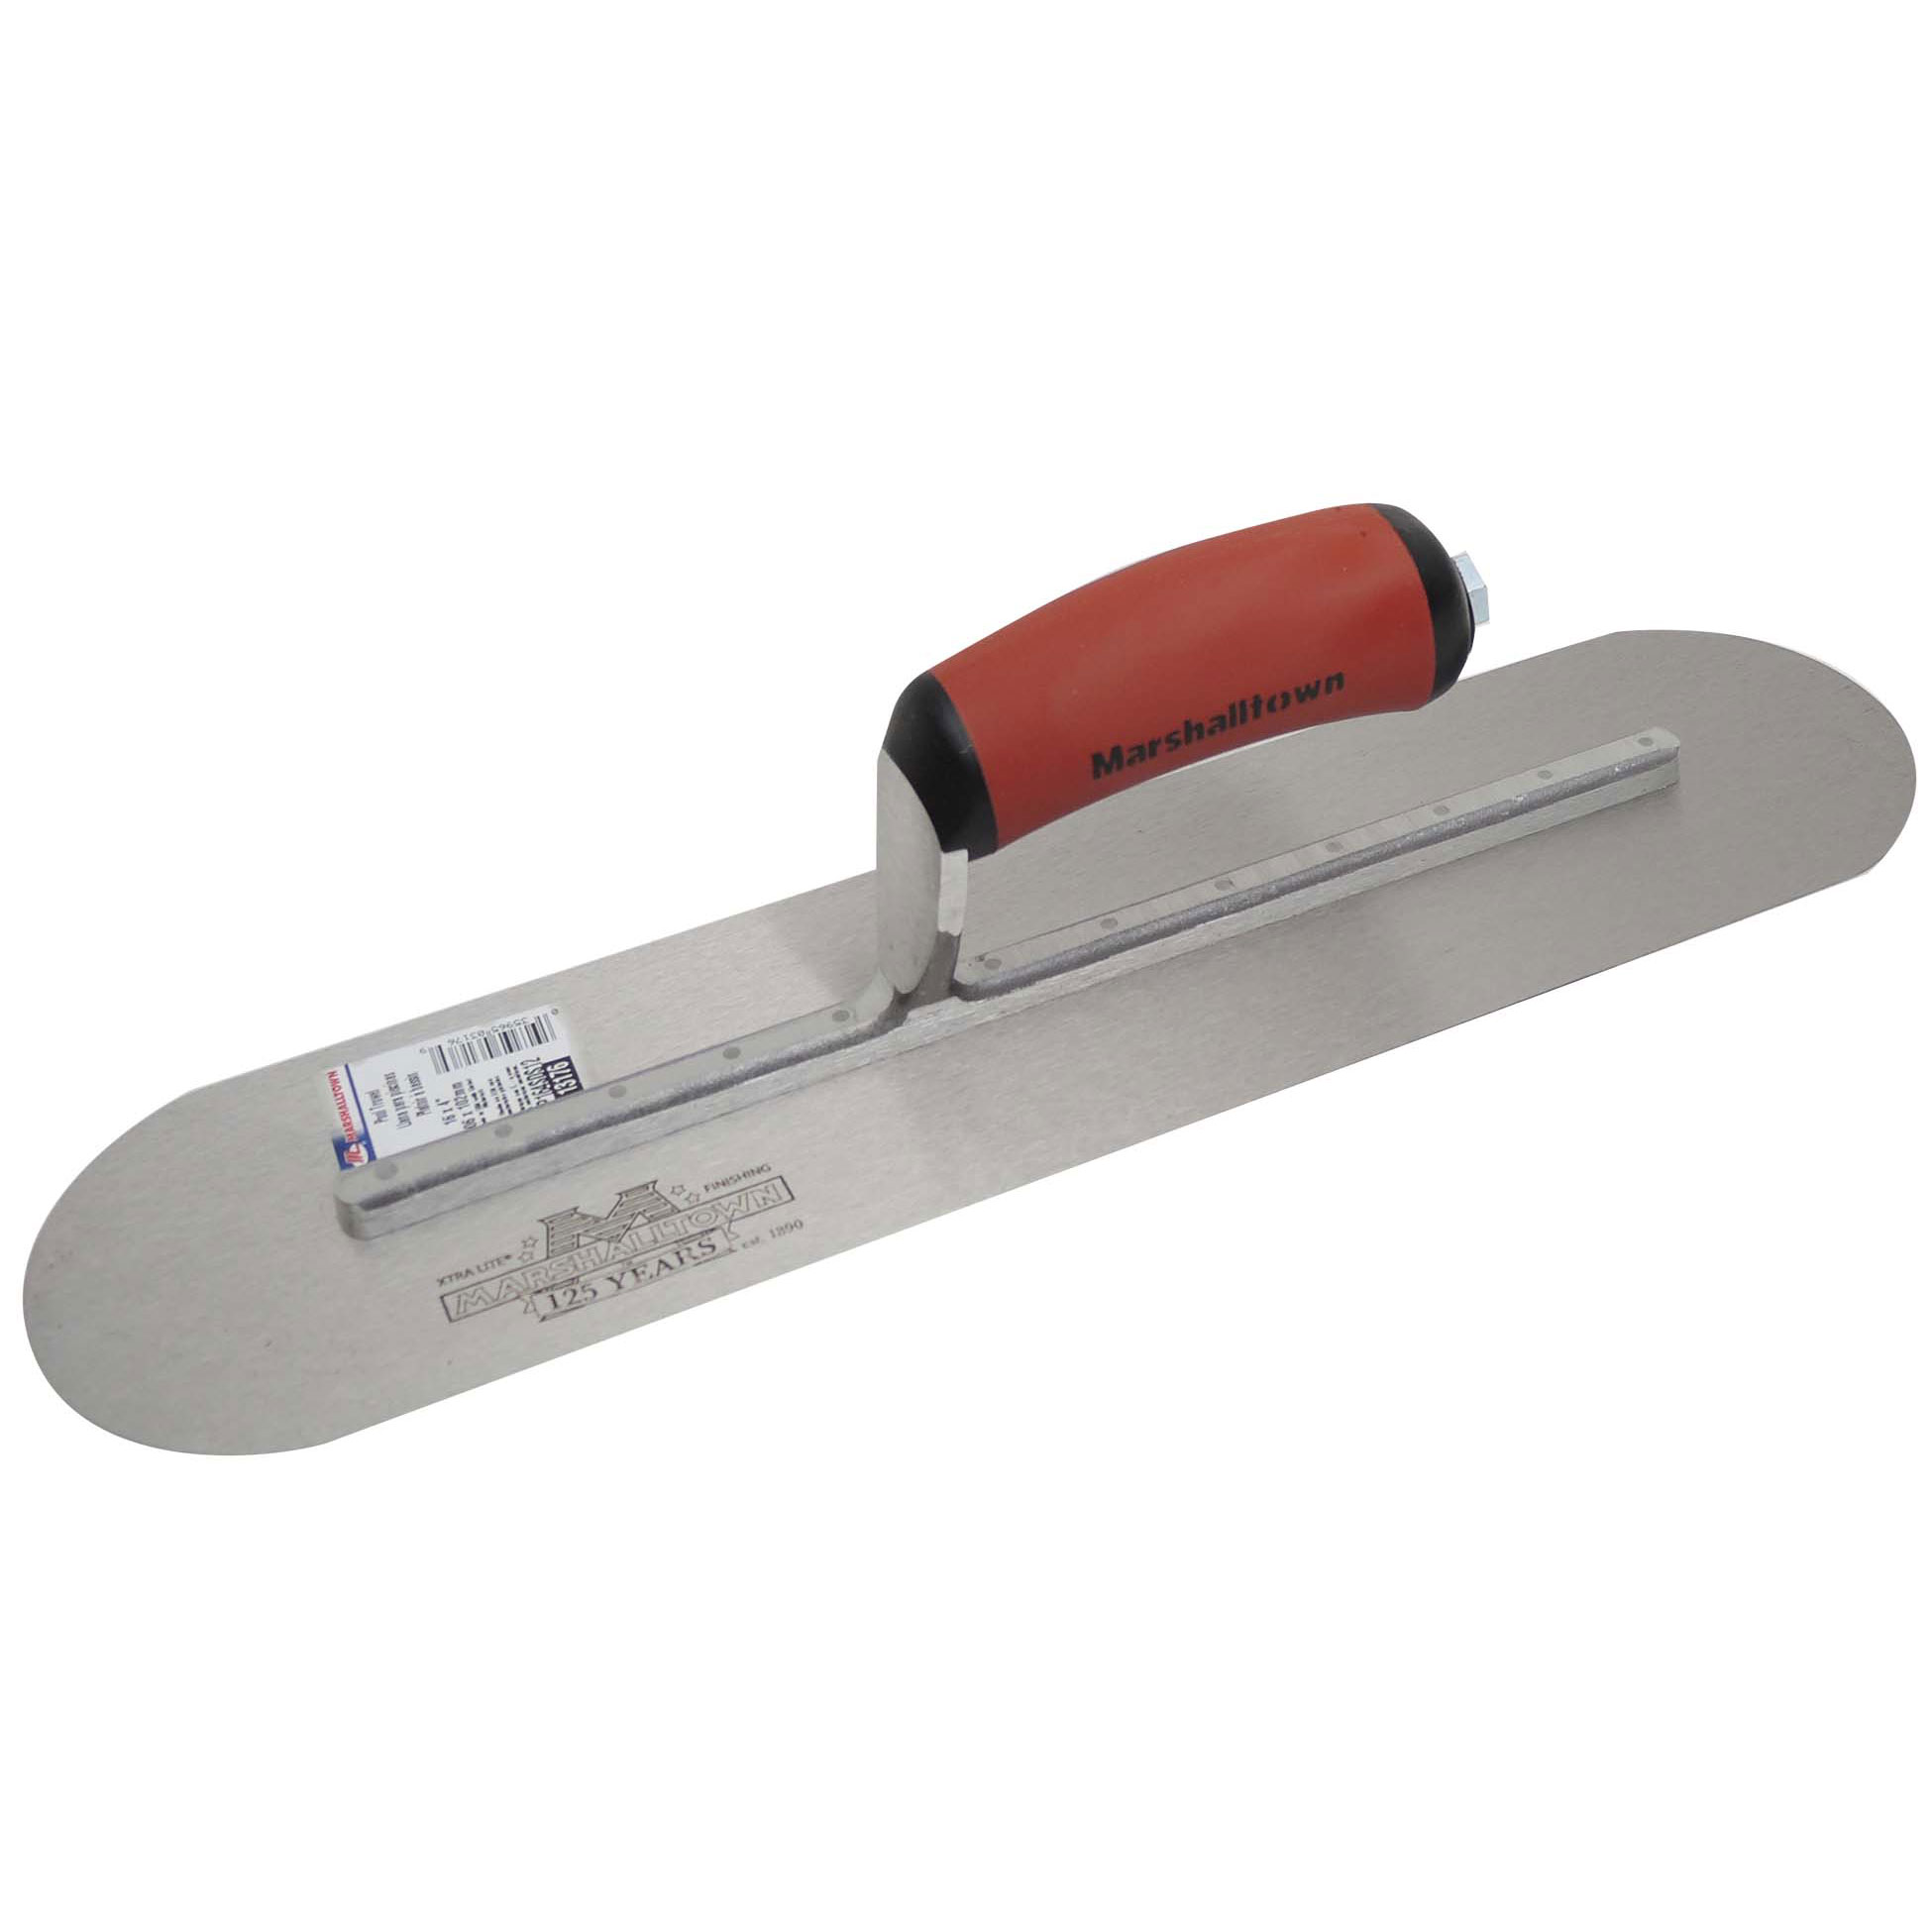 Marshalltown SP14SDS5 14in x 4in Pool Trowel with 5 Rivets and DuraSoft Handle SP14SDS5